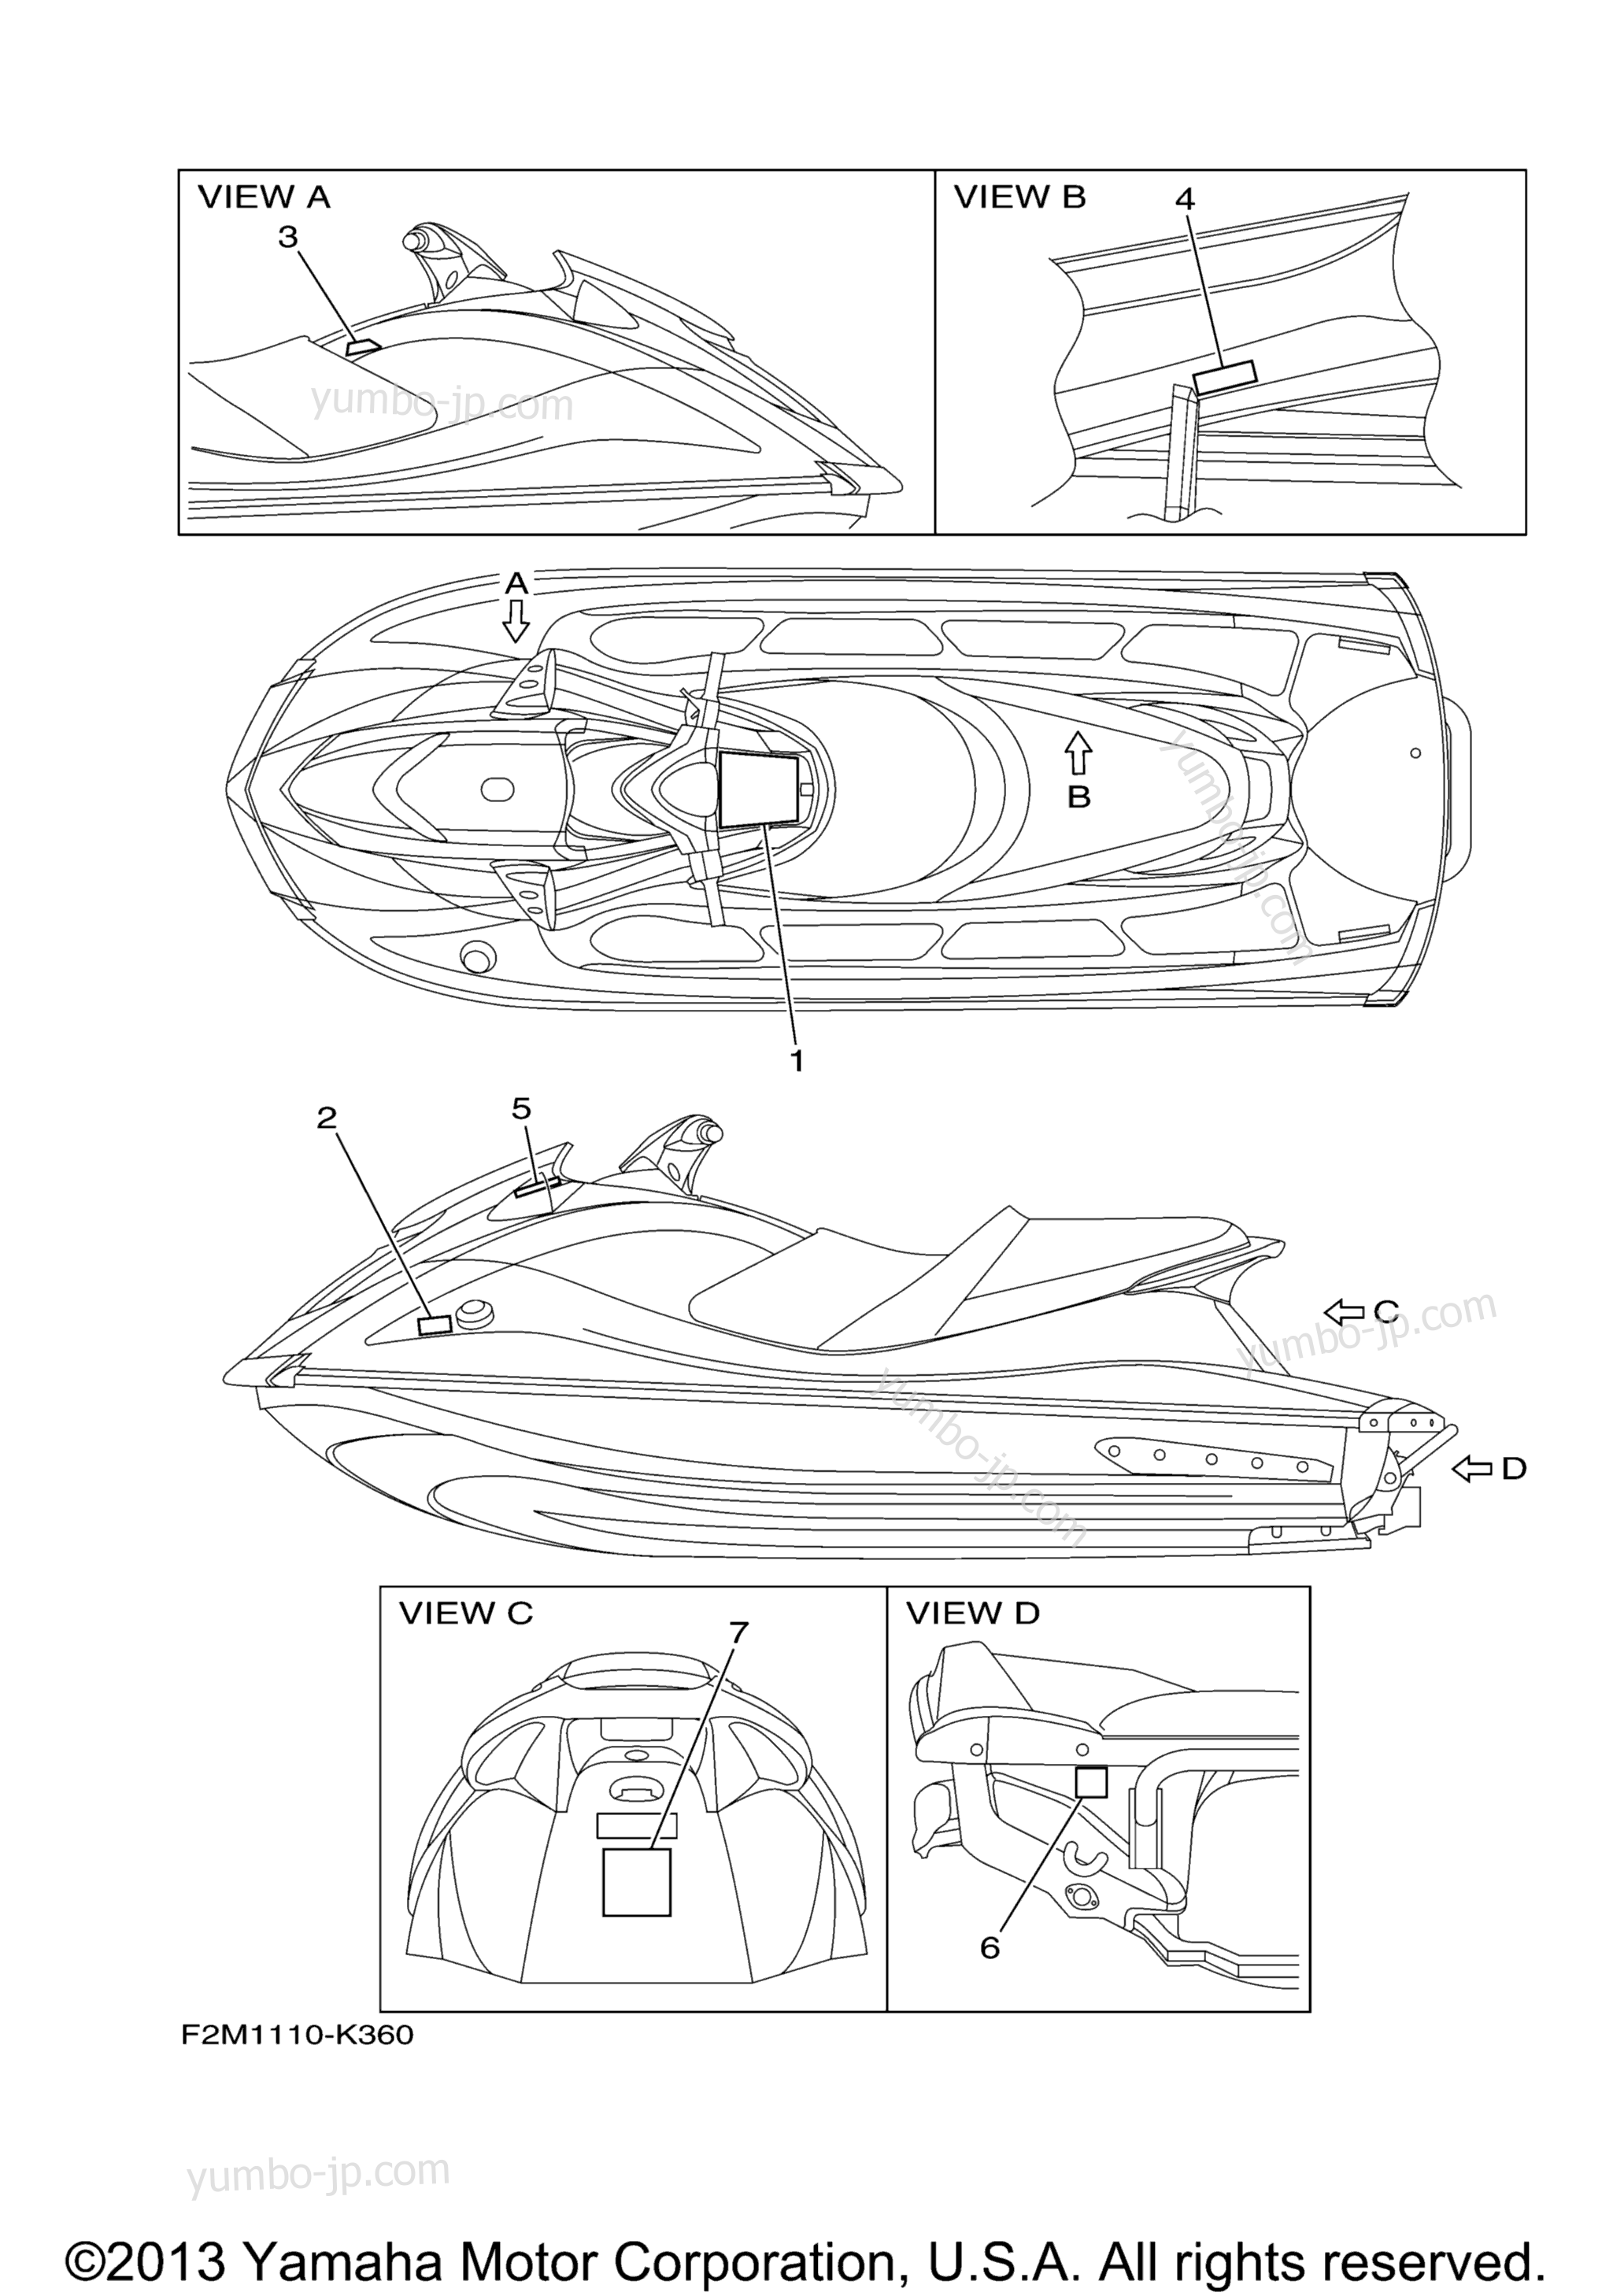 Important Labels for watercrafts YAMAHA VXS (VX1800K) 2011 year